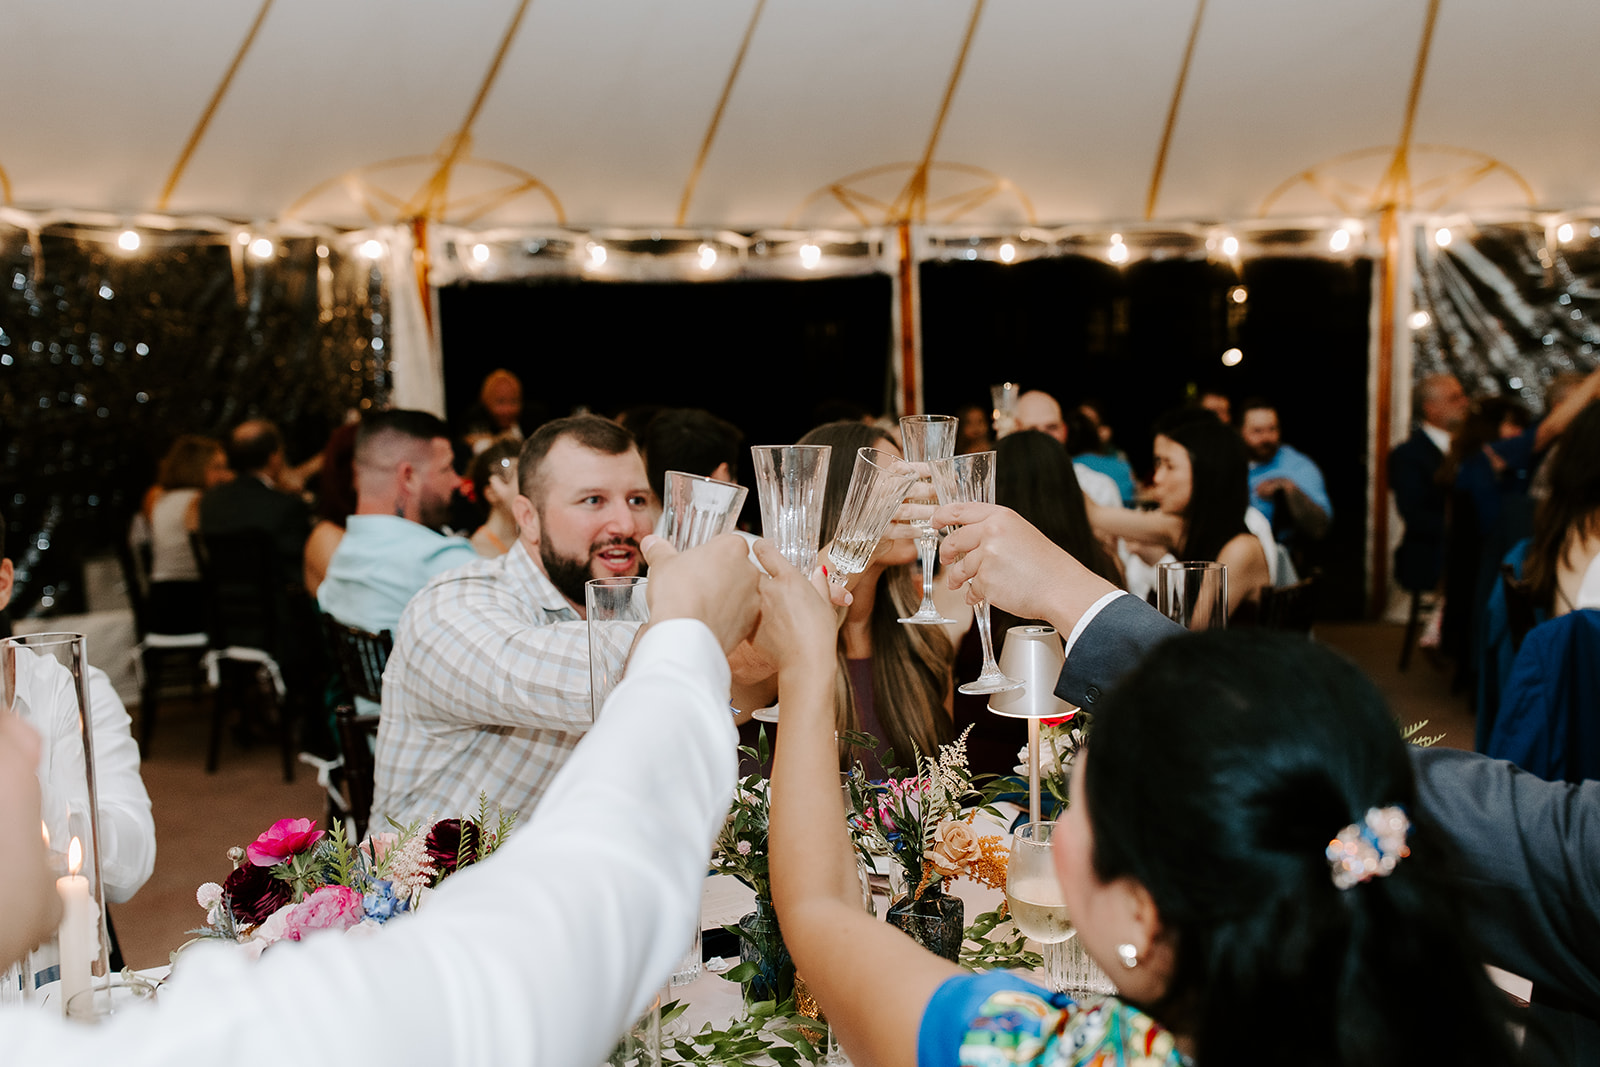 Guests celebrate and toast during the stunning willowdale estate wedding reception